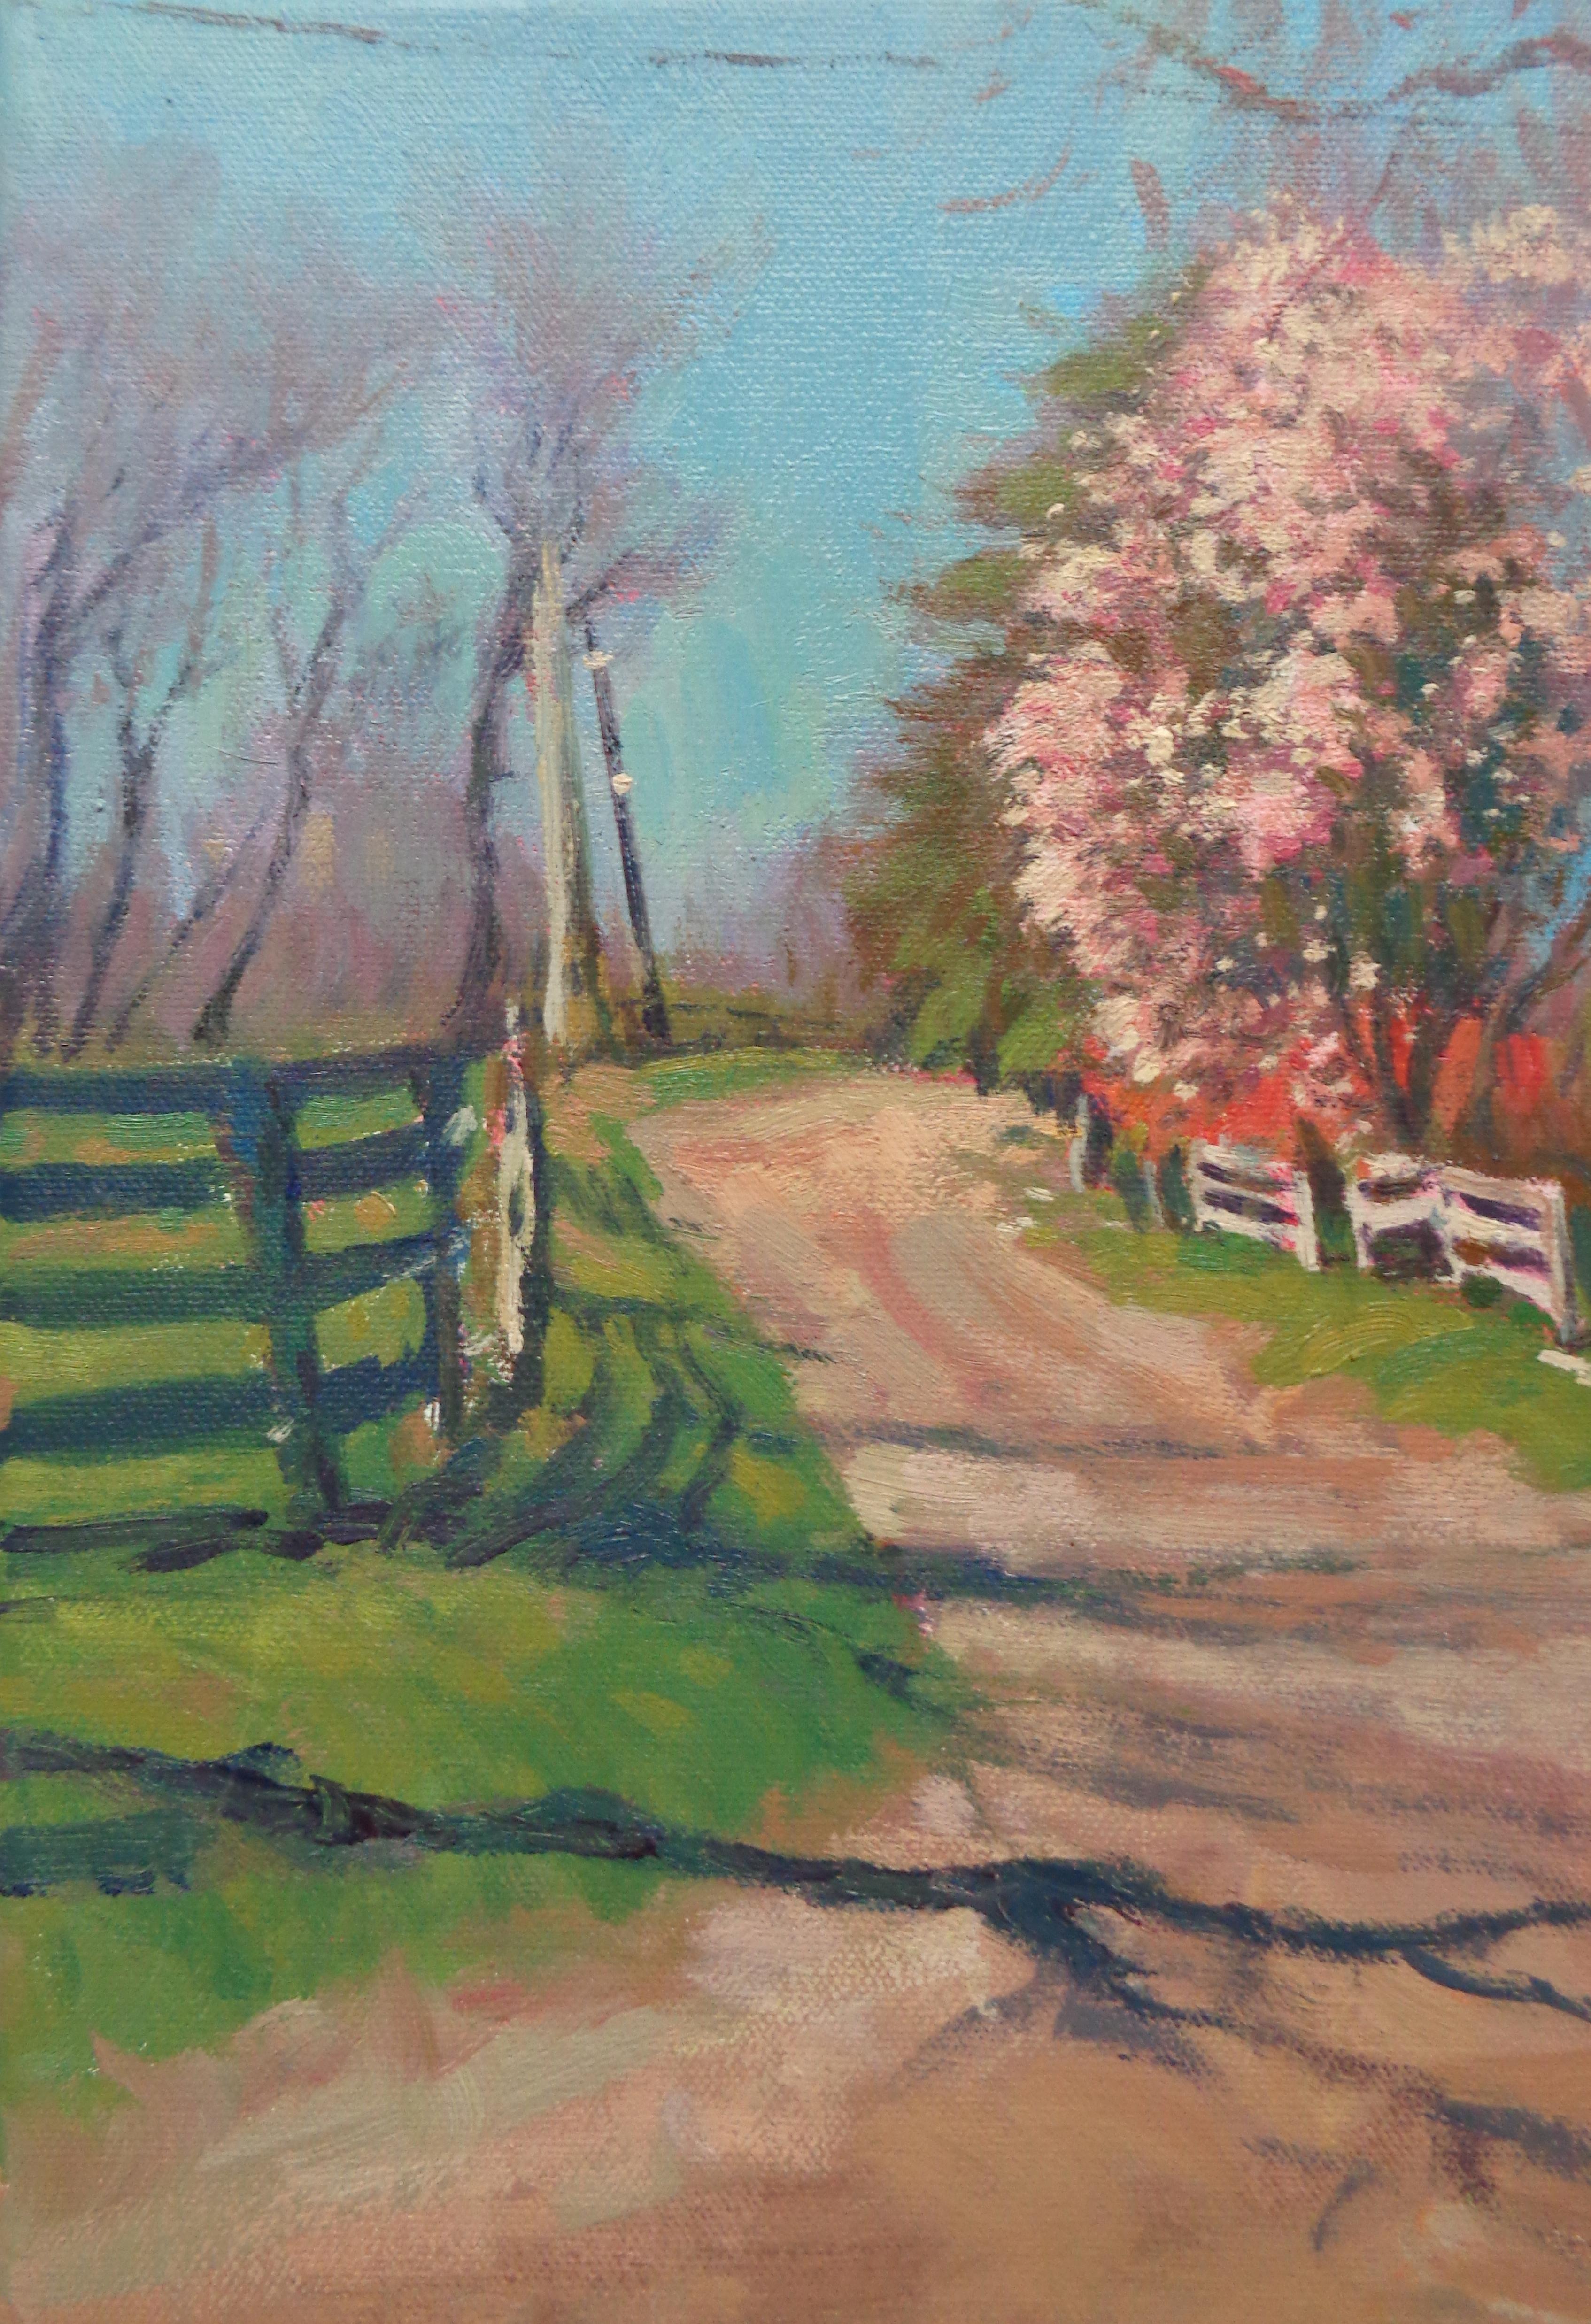 An oil painting on canvas that showcases the beautiful light of an early spring day with a view of a flowering tree along a farm lane. Painting is unframed

ARTIST'S STATEMENT
I have been in the art business as an artist and dealer since the early